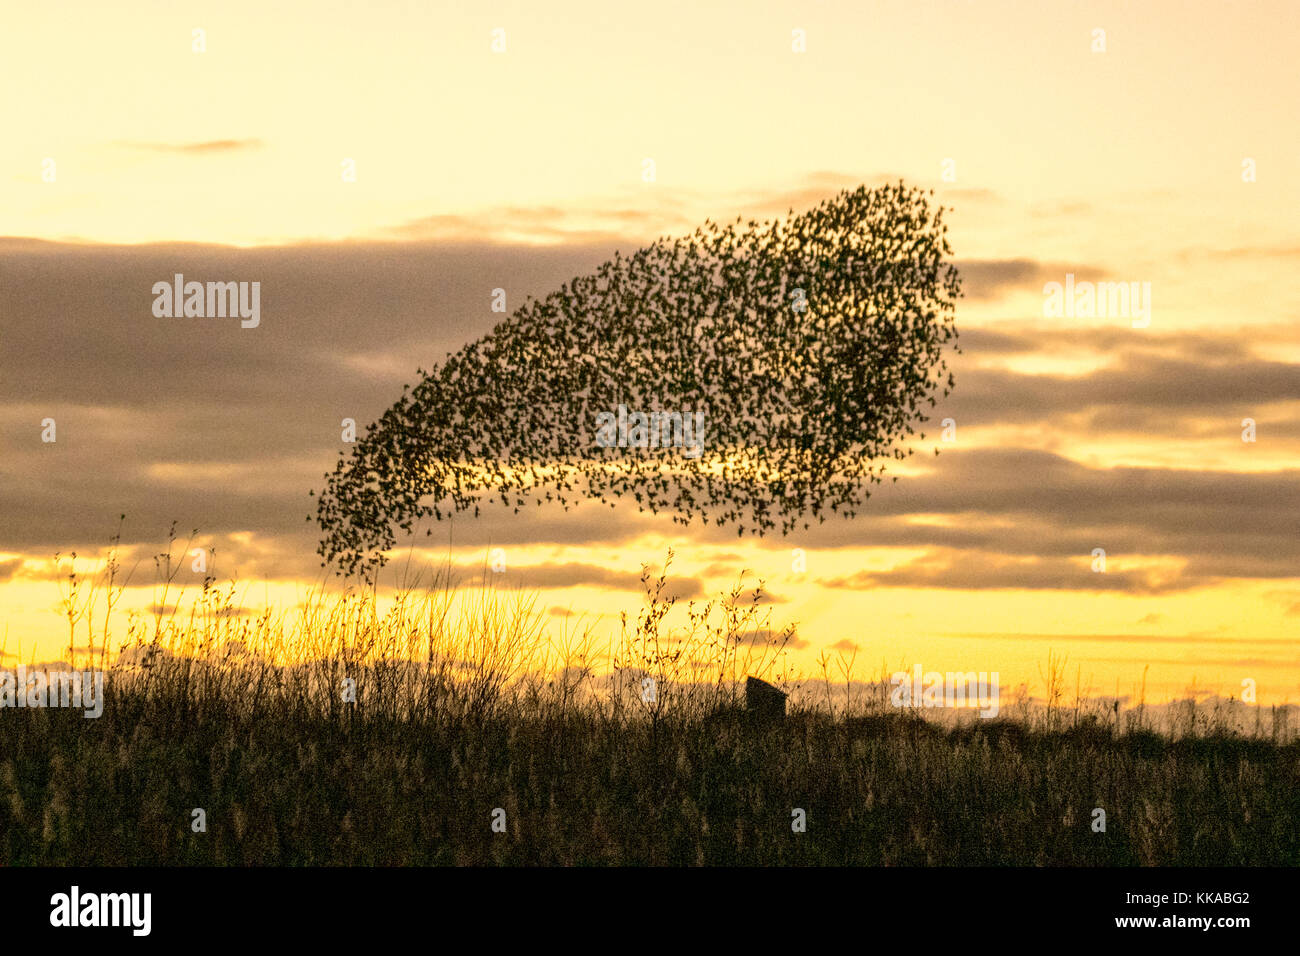 Burscough, Lancashire. UK Weather. 29th November, 2017.Tens of thousands of starling seeking a communal roost in the reed beds at Martin Mere, are harried and pursed by a resident peregrine falcon. The shapes and swirls form part of an evasive technique to survive and to confound and dazzle the bird of prey. The larger the simulated flocks, the harder it is for the predators to single out and catch an individual bird. Starlings can fly swiftly in coordinated and mesmerising formations as a group action to survive the attack. Credit;MediaWorldImages/AlamyLiveNews. Stock Photo